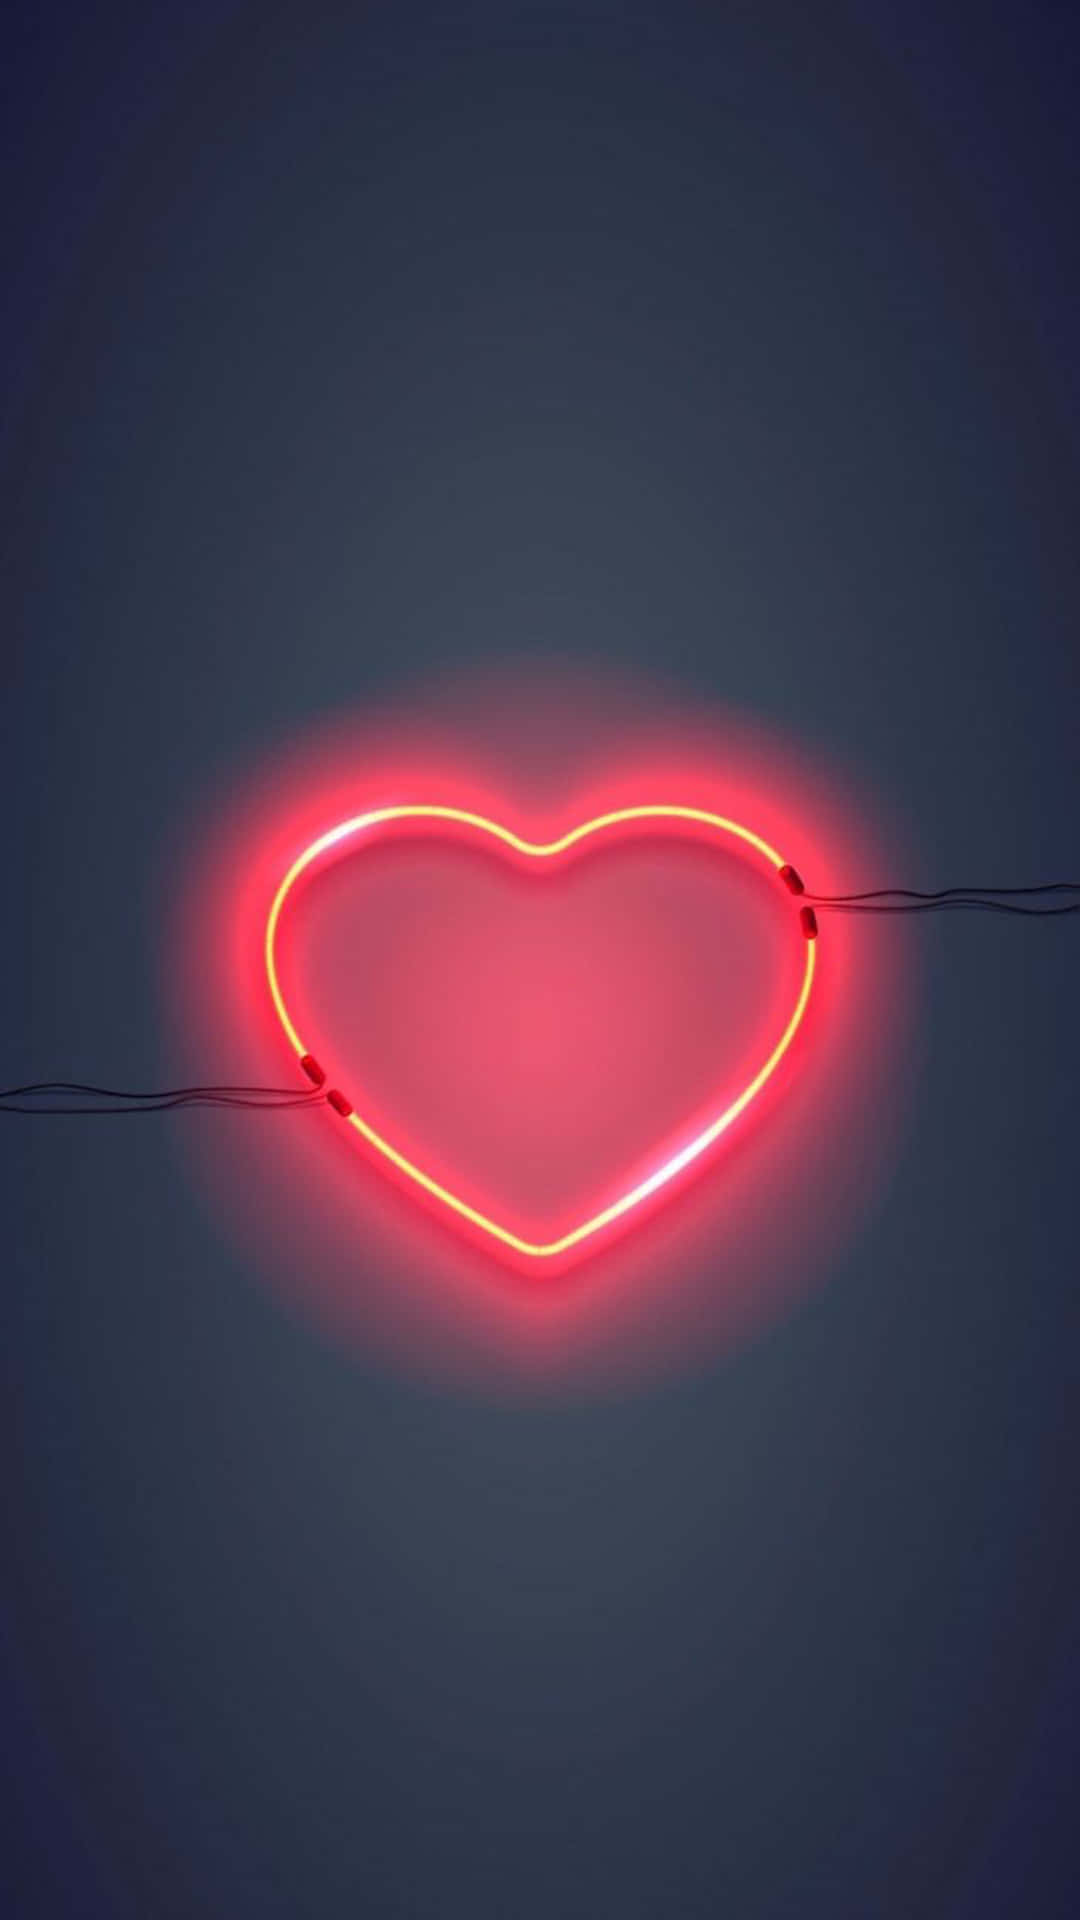 Cute Neon Pink Heart With Strings Wallpaper